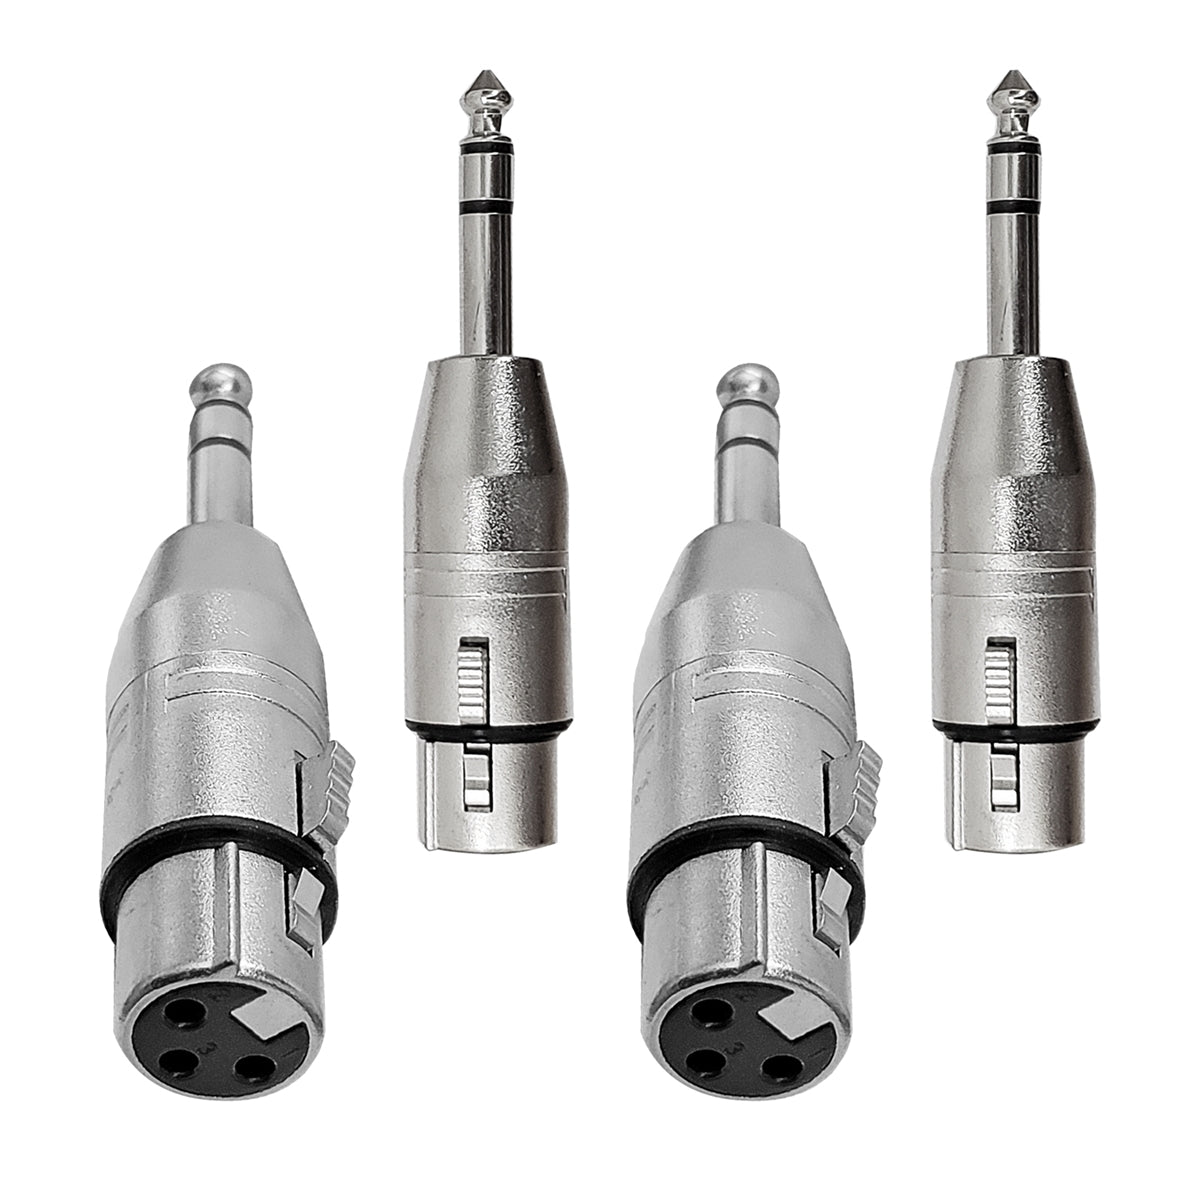 AxcessAbles 1/4-inch TRS to XLR Adapter, Balanced Quarter Inch 6.35mm Male to XLR Female Adapters - 4 Pack